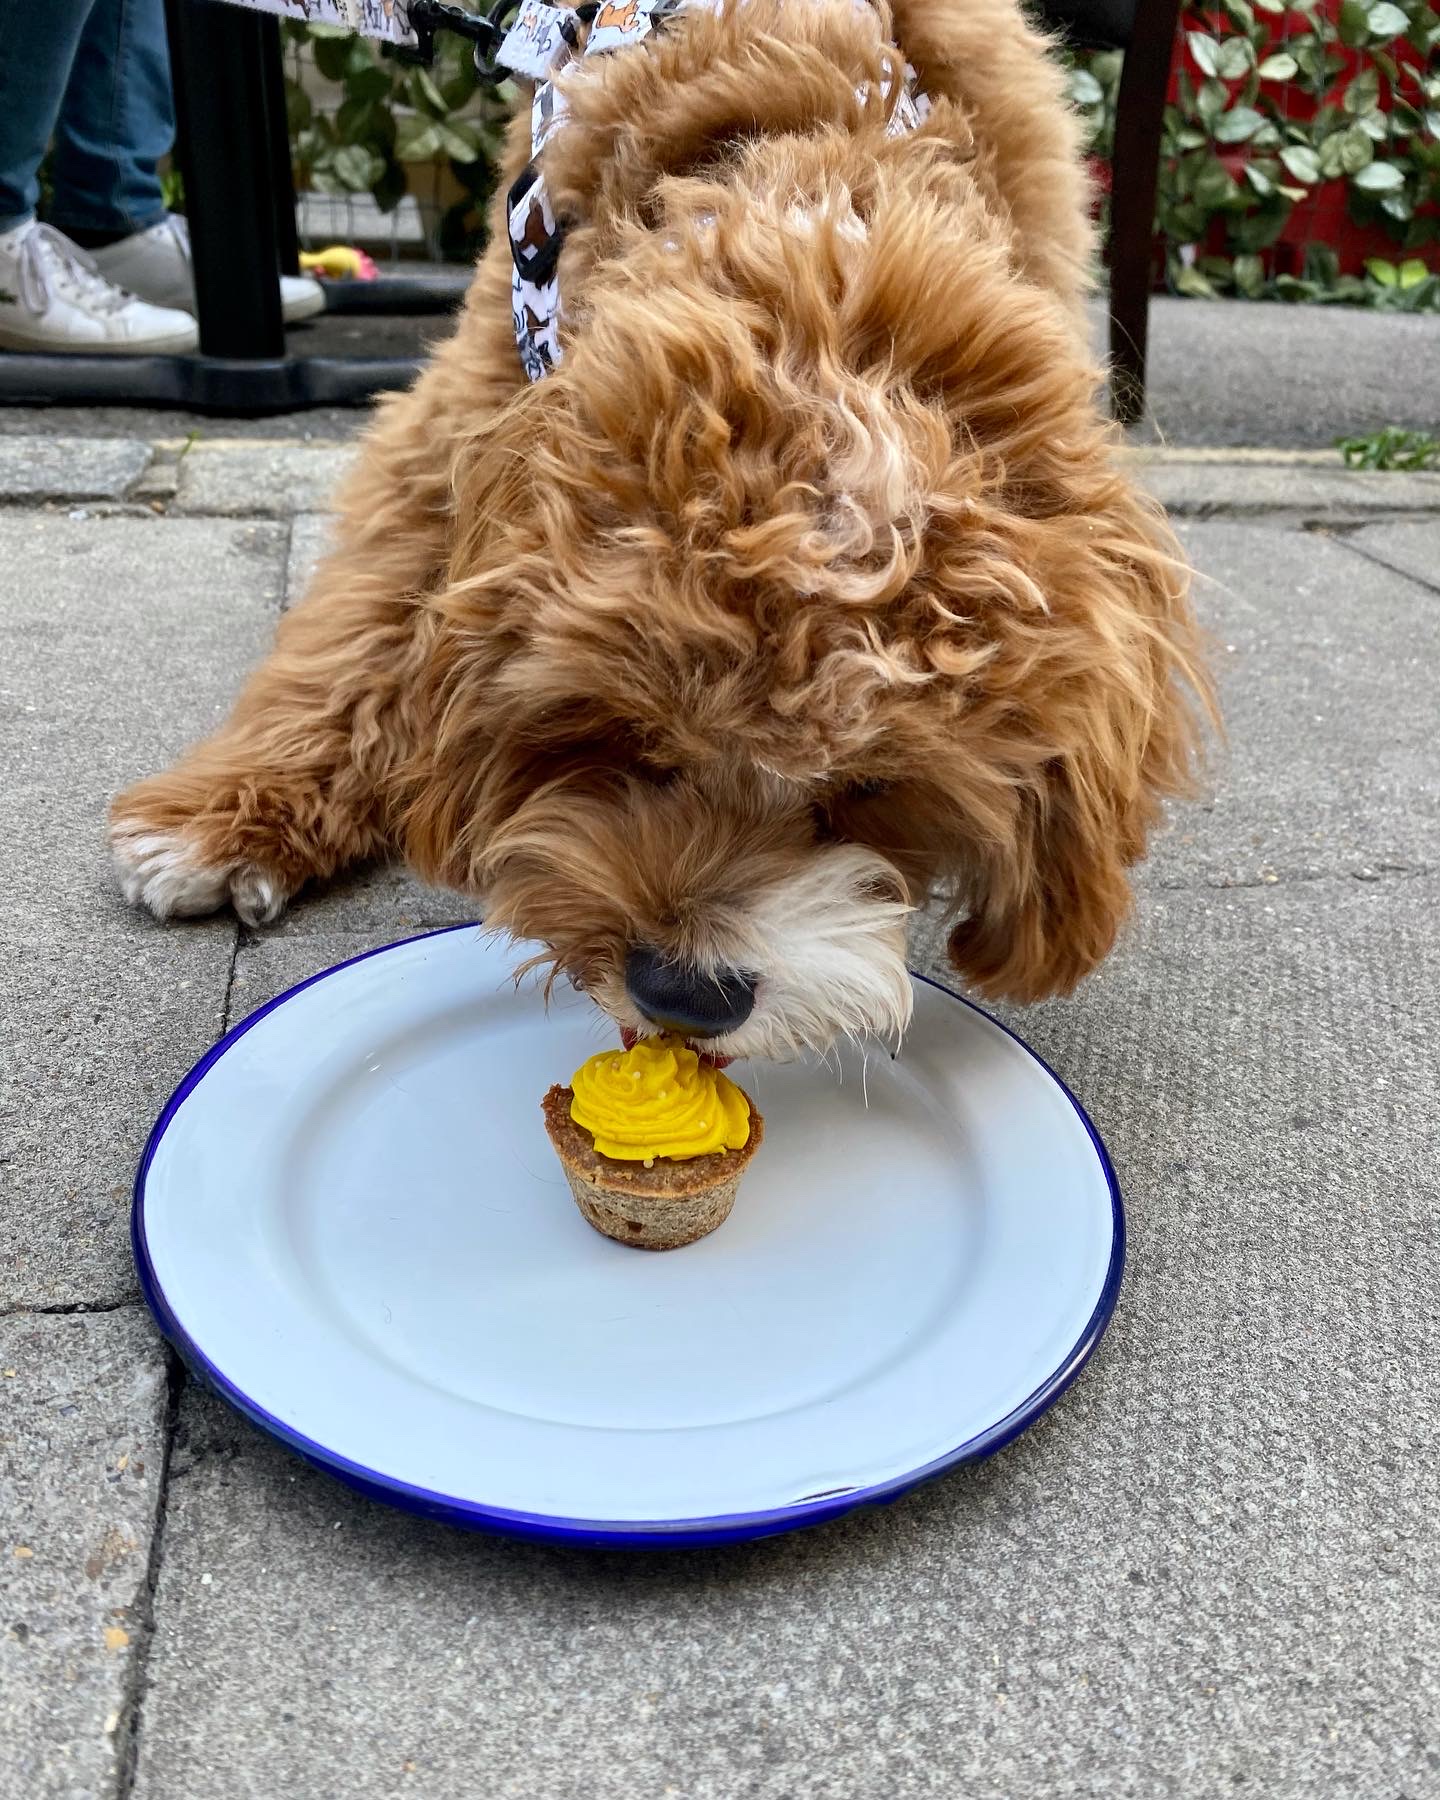 A cavapoo puppy eating a yellow pupcake off a plate.